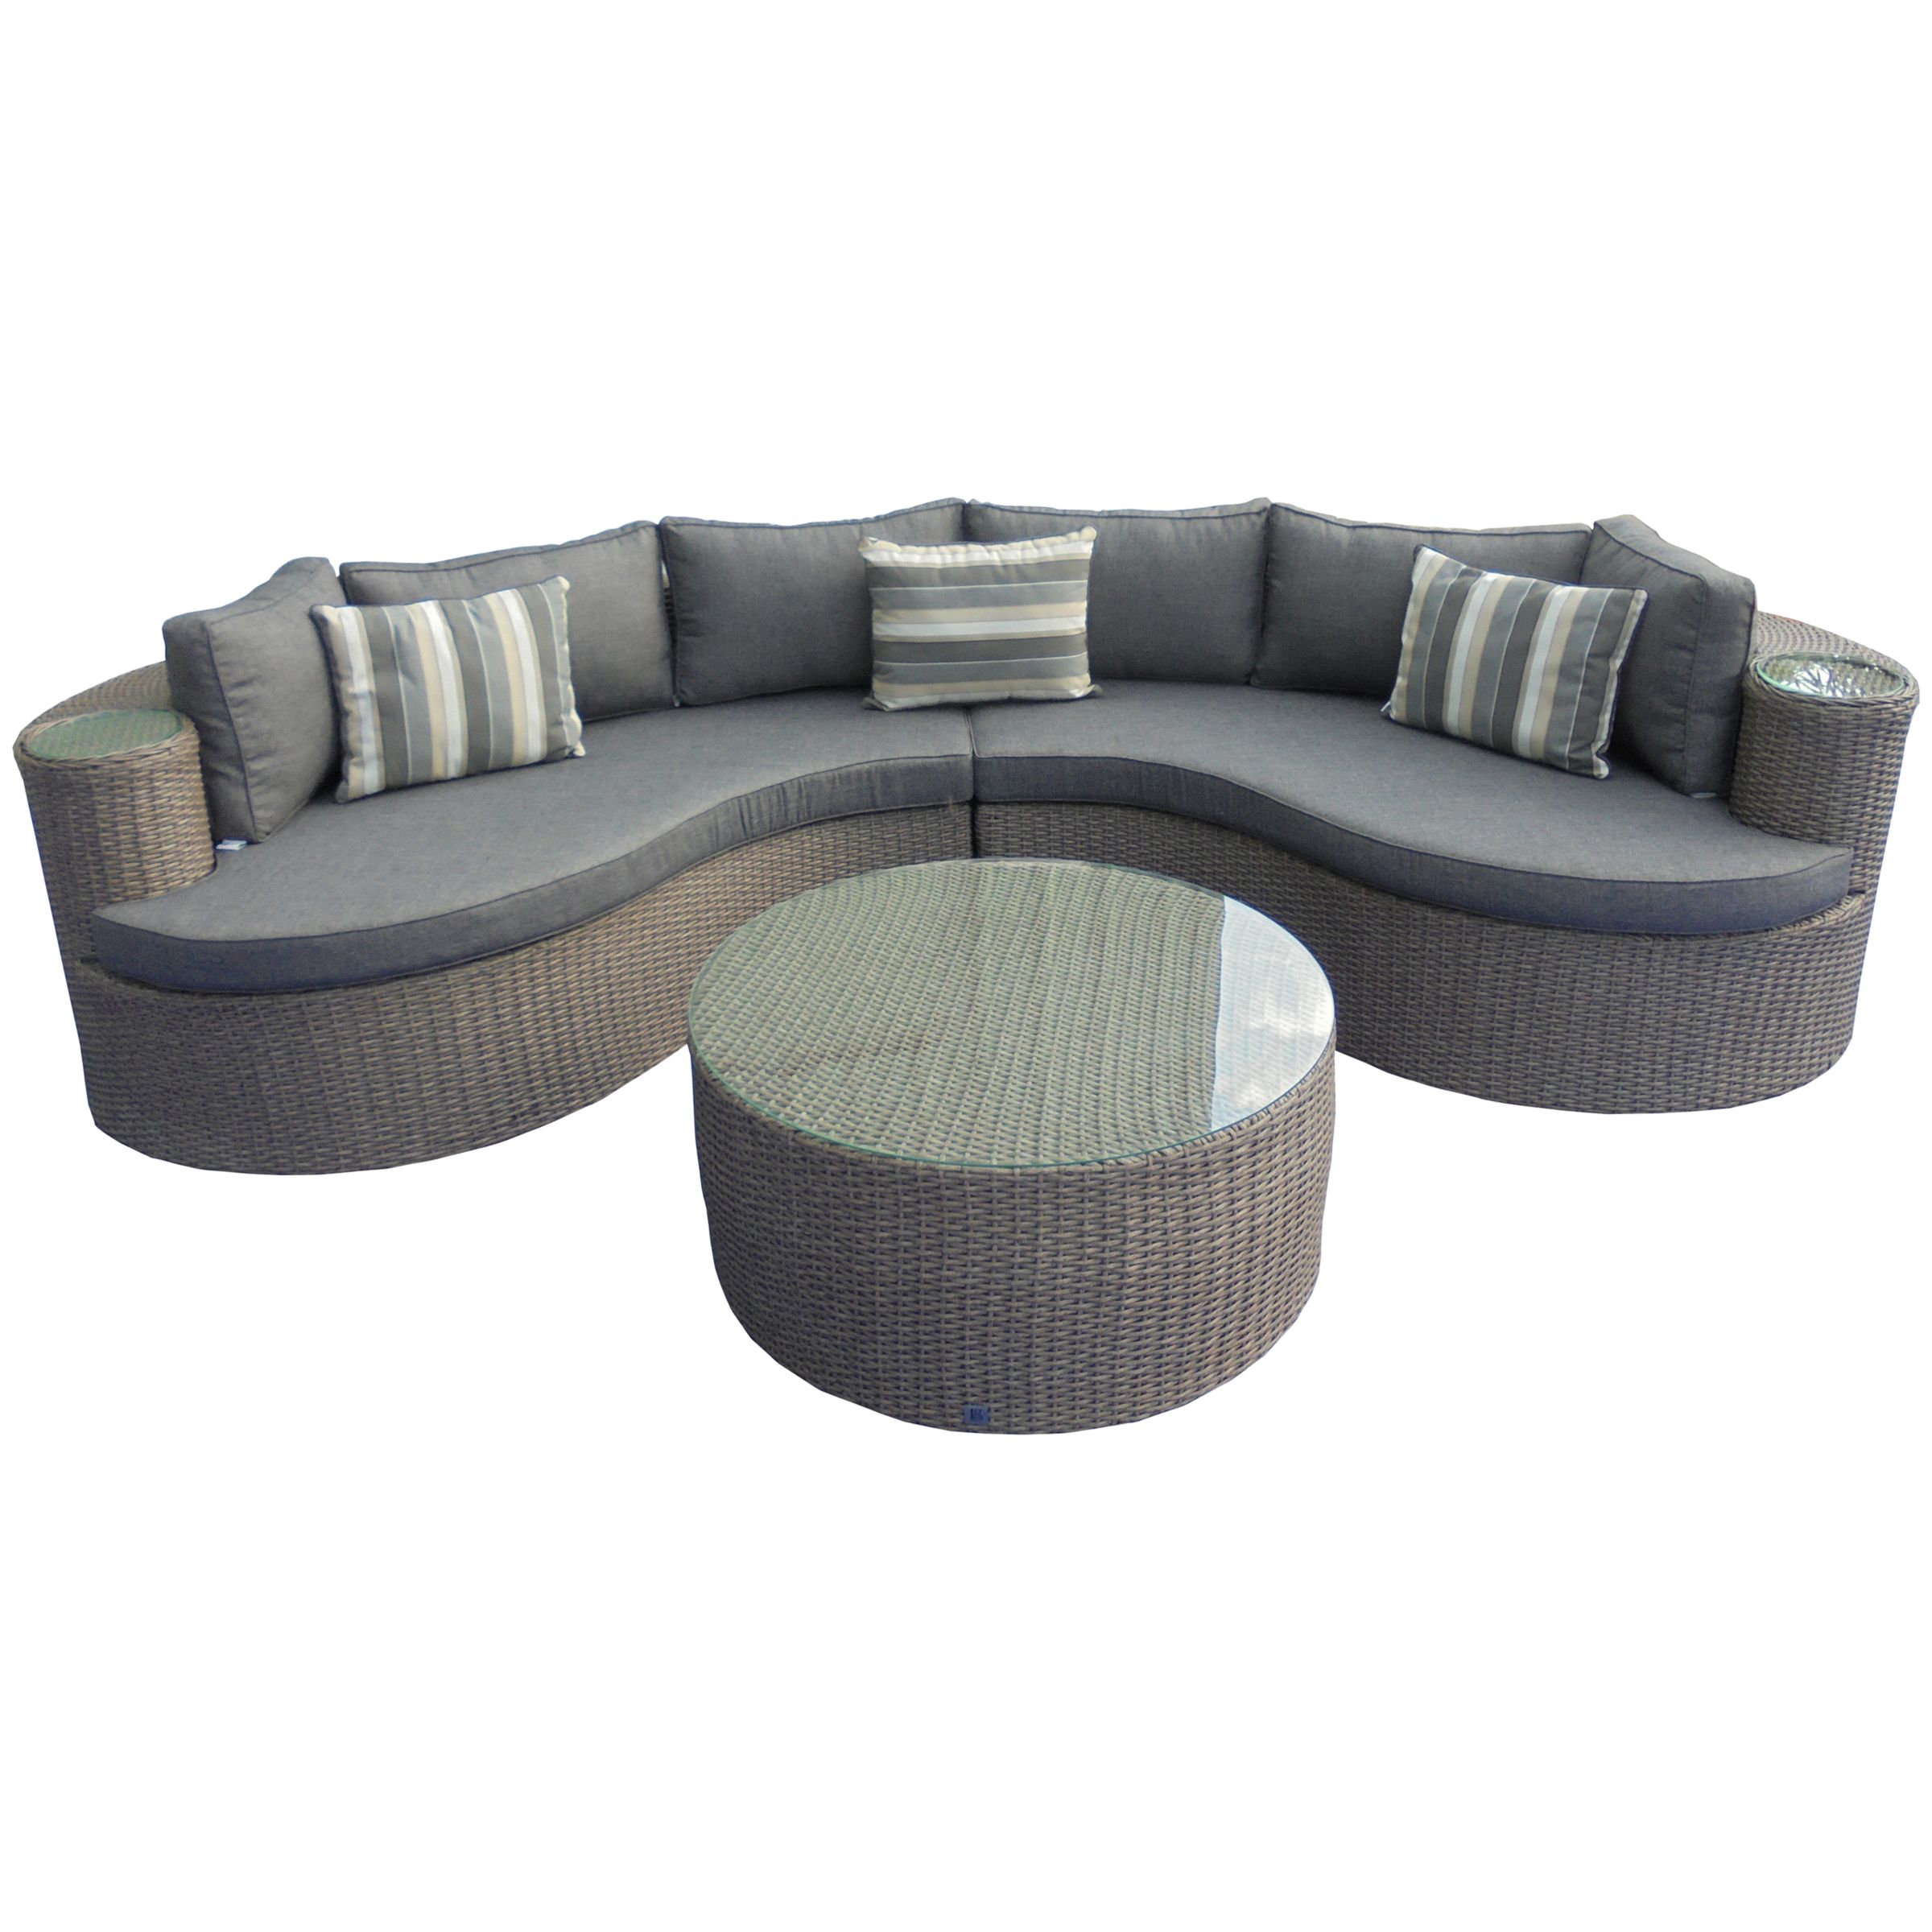 Lg Outdoor Saigon Rustic Weave Curved, Curved Modular Outdoor Seating